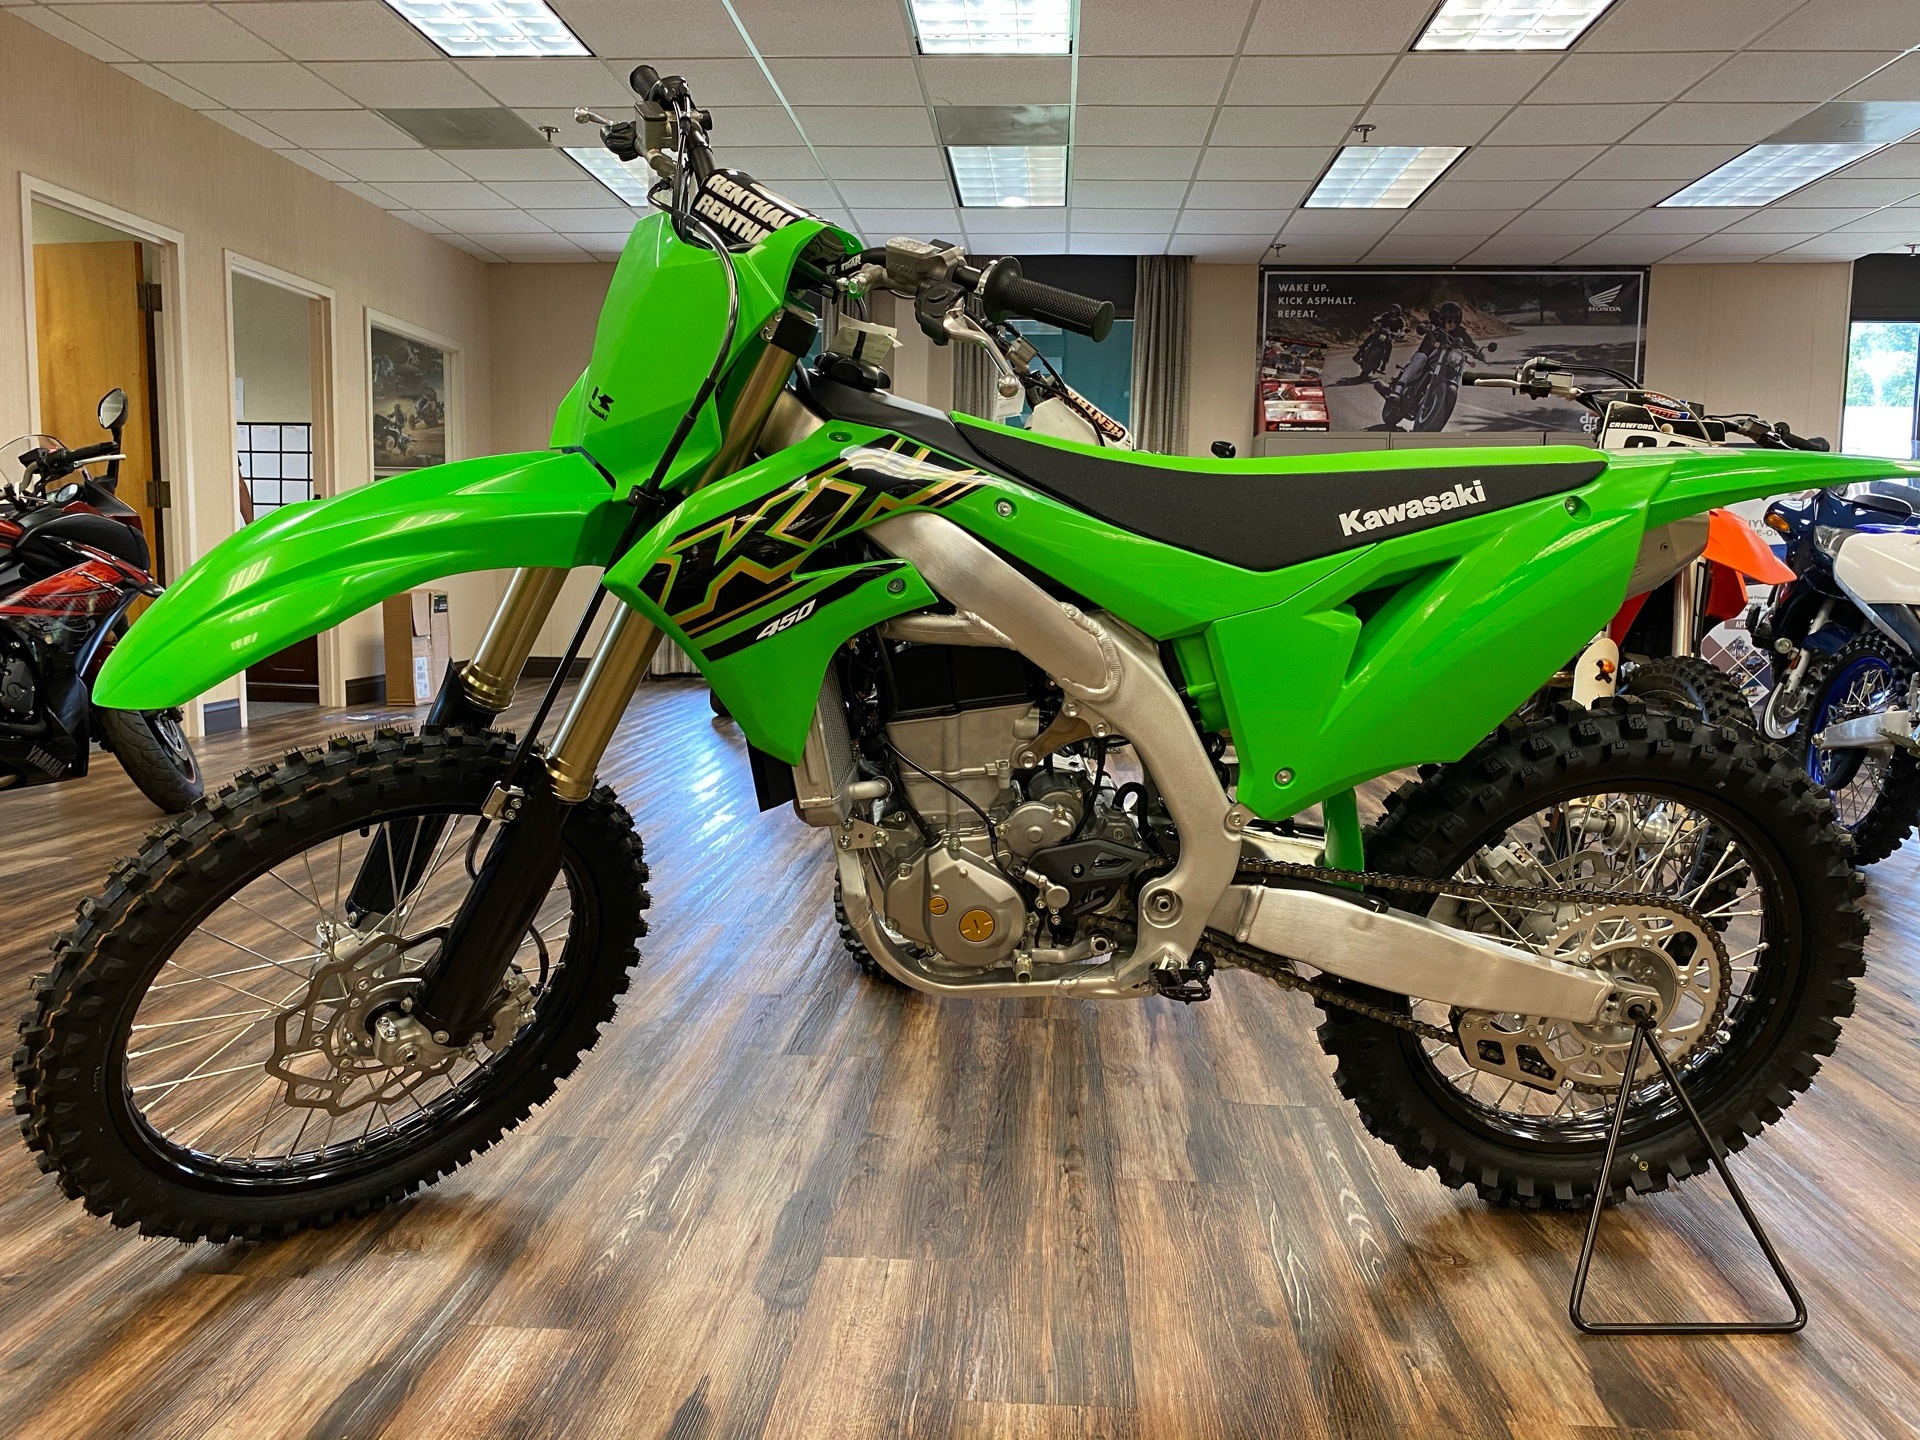 Personlig Samlet Converge New 2021 Kawasaki KX 450 Motorcycles in Statesville, NC | Stock Number:  018755 - greatwesternmotorcycles.com